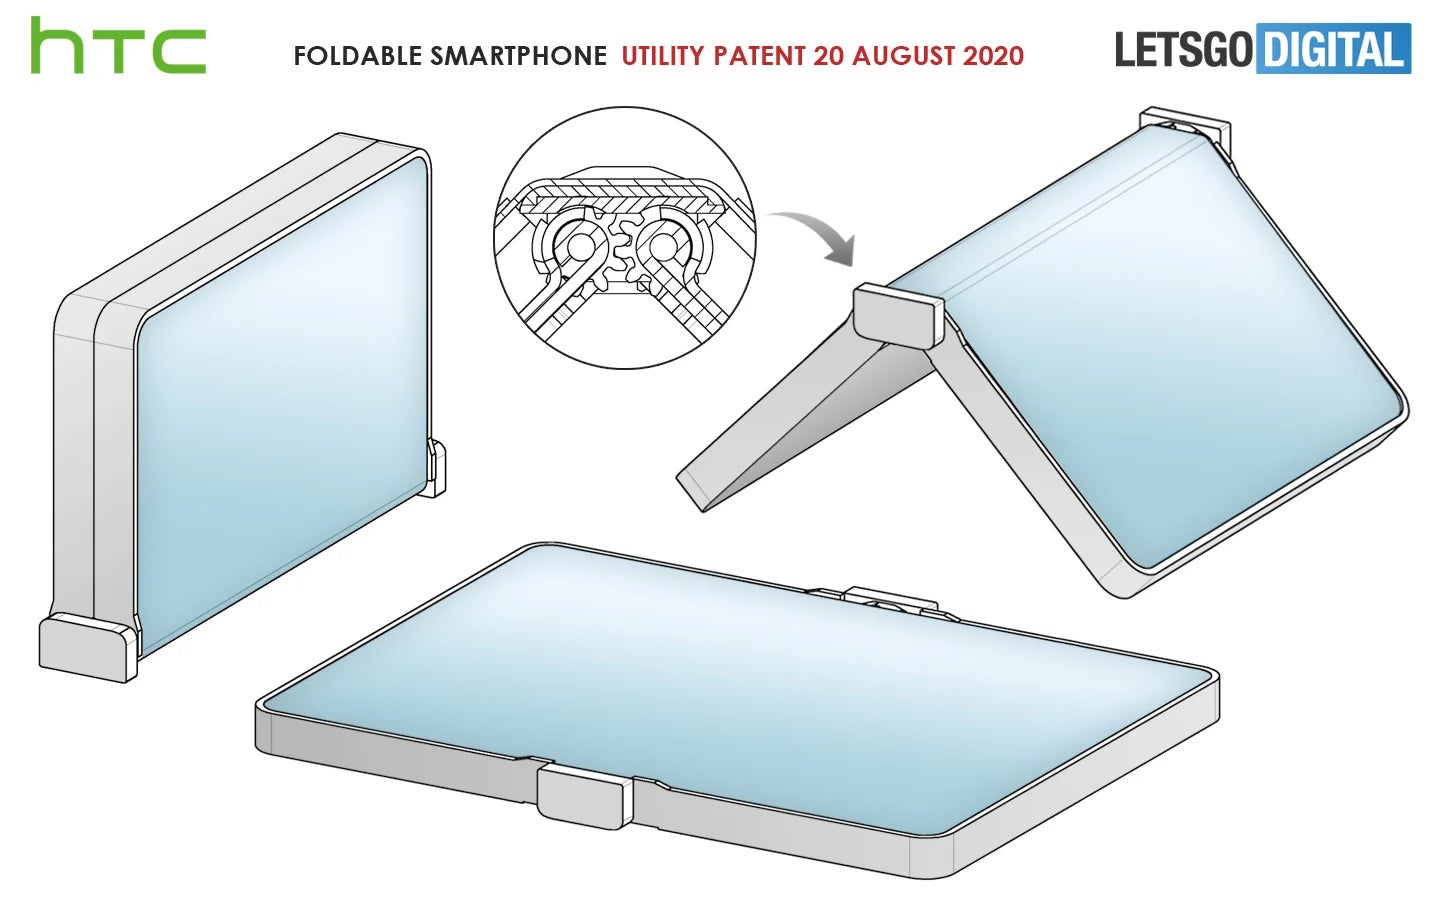 HTC patent drawings - HTC's foldable smartphone is awkward rather than exciting